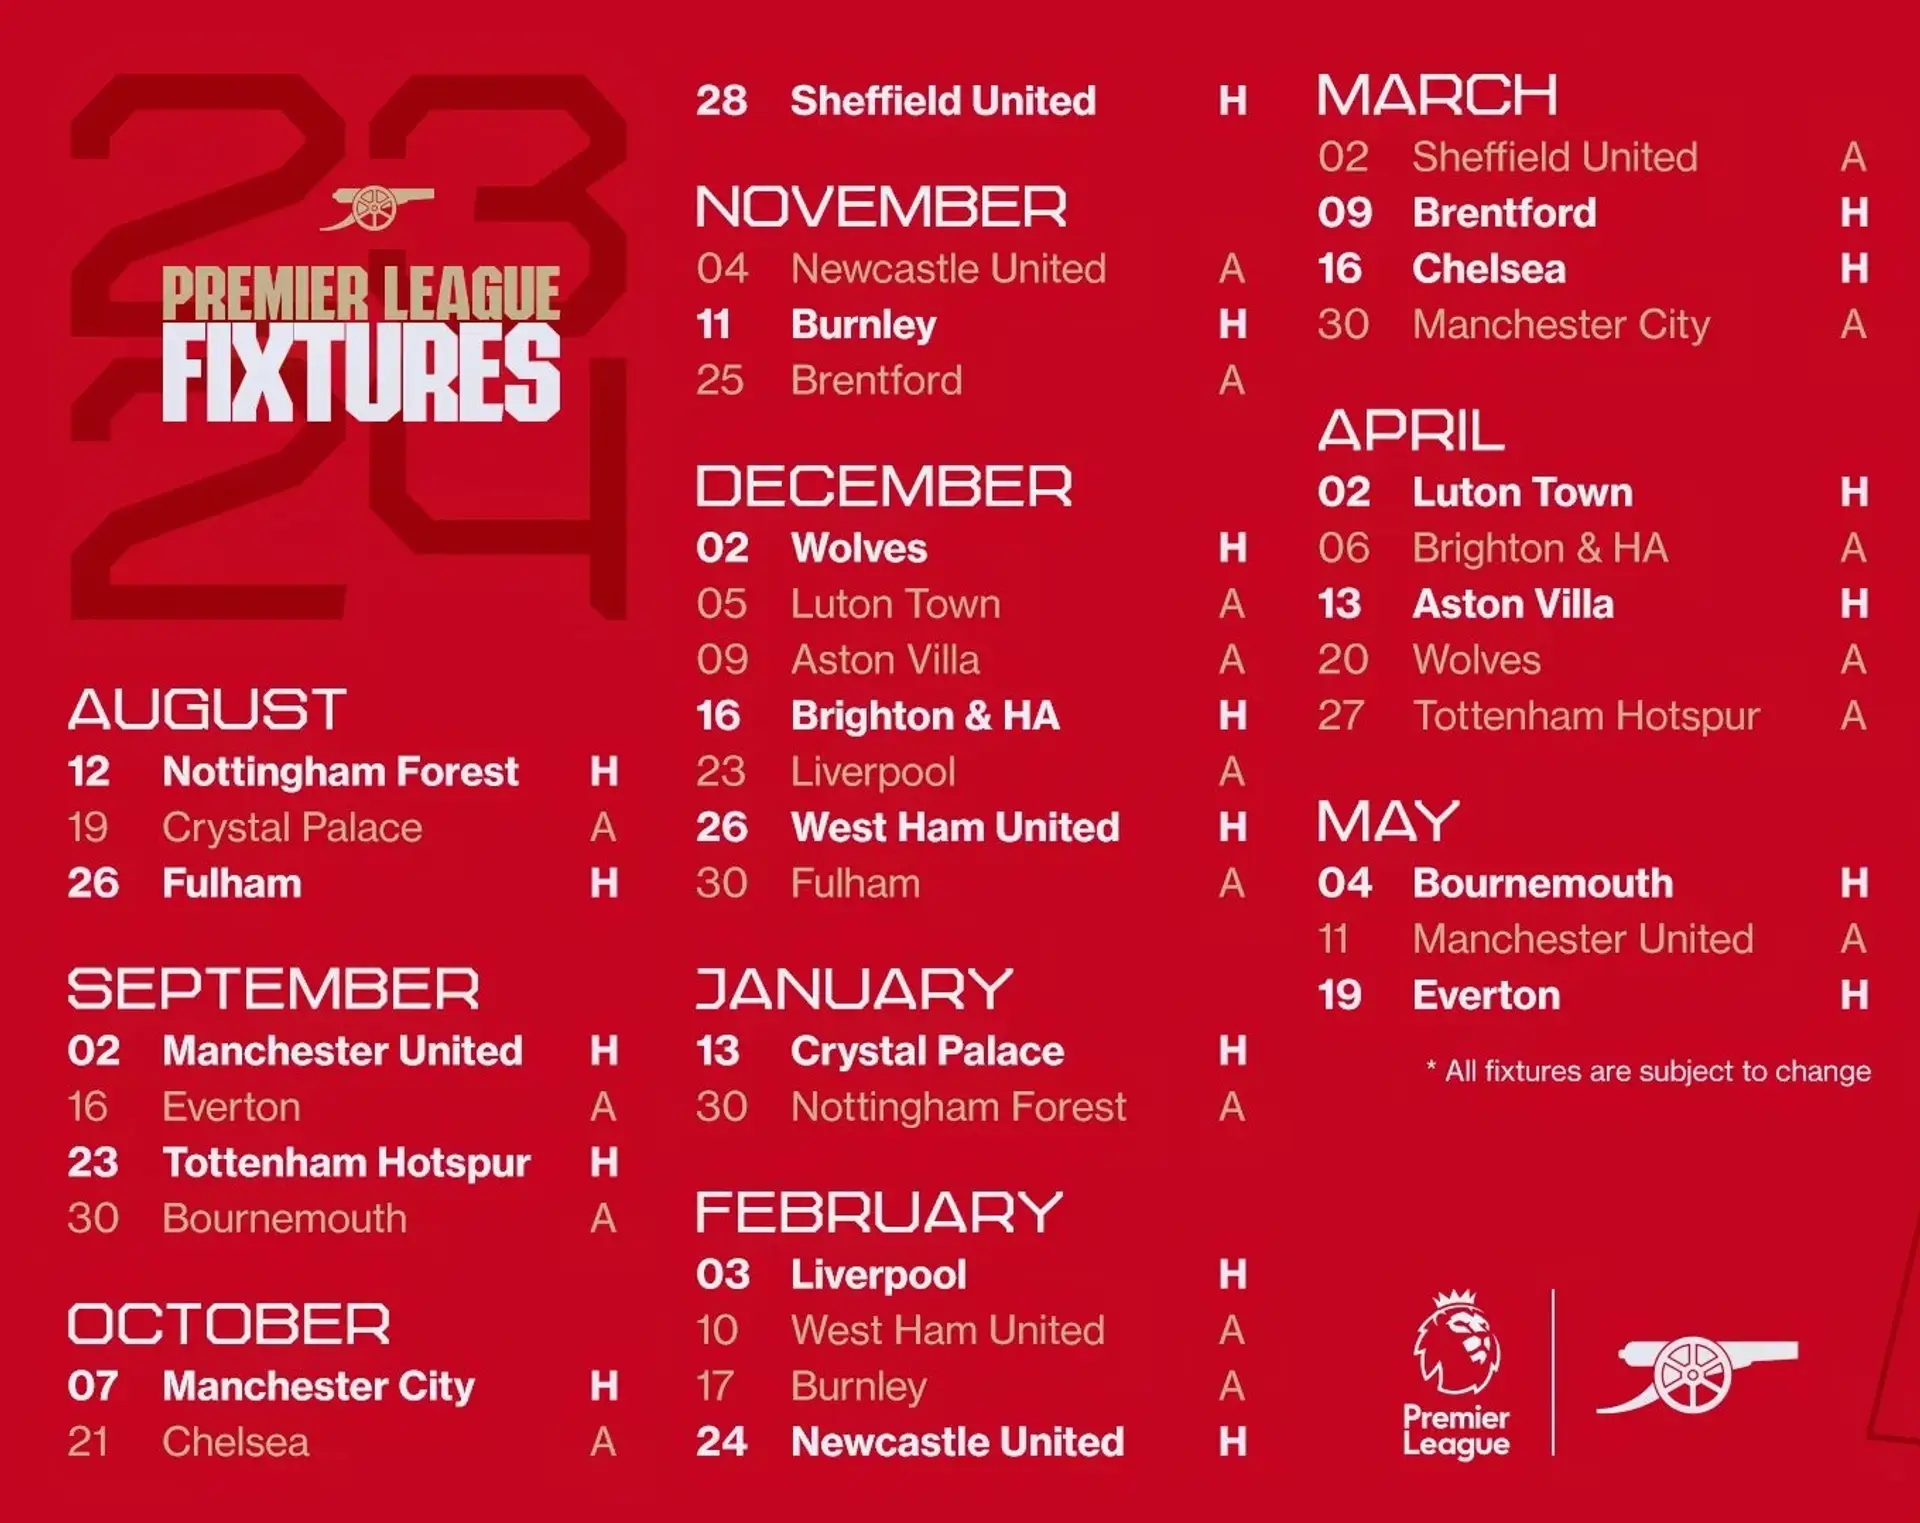 When will the 2023/24 Championship fixtures be released?